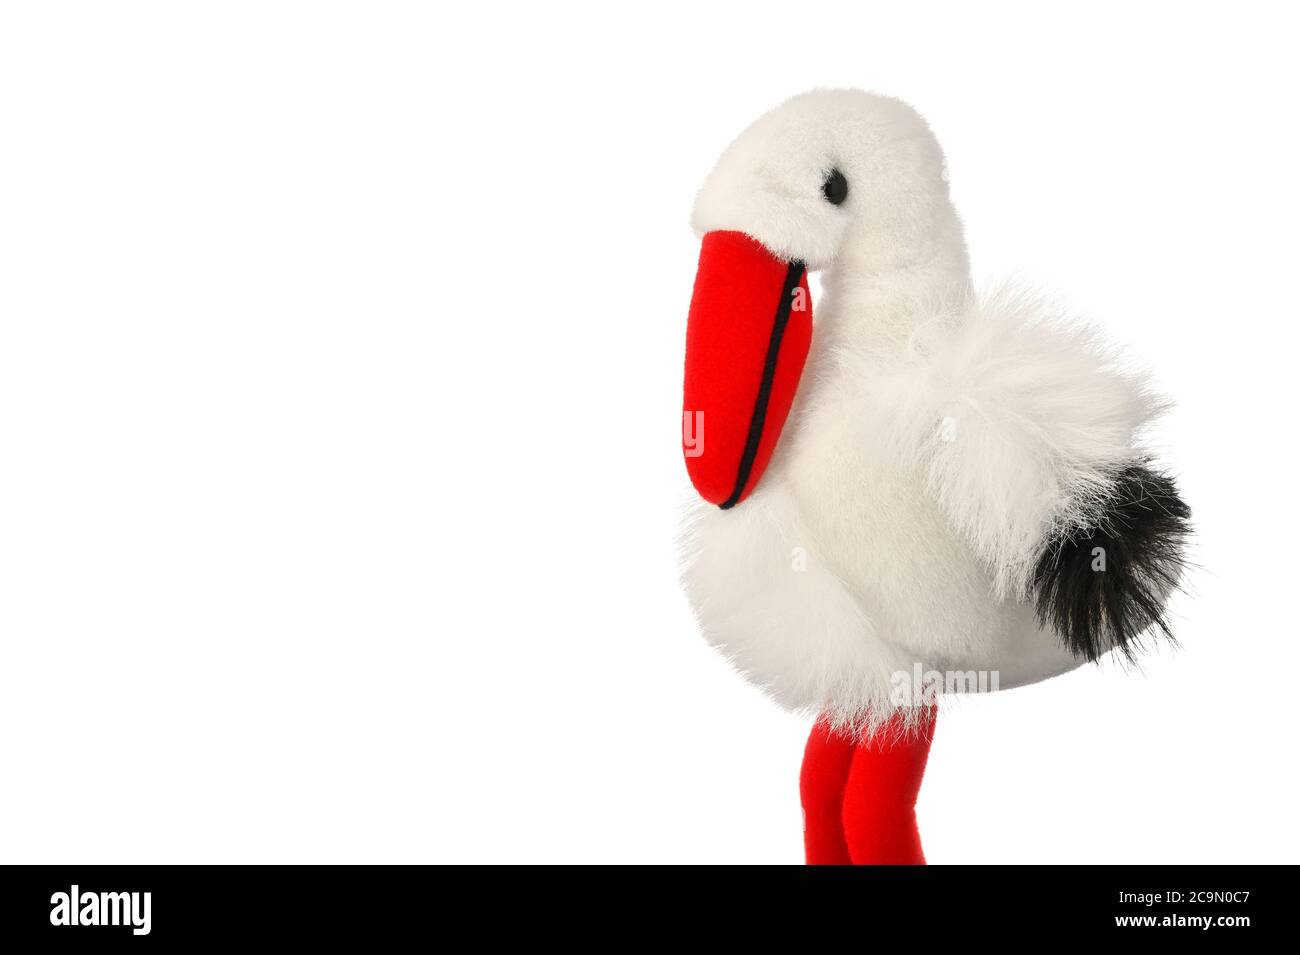 Typical souvenir from Alsace, France. Soft toy white stork bird (Ciconia ciconia) isolated on white background with copy space. Stock Photo